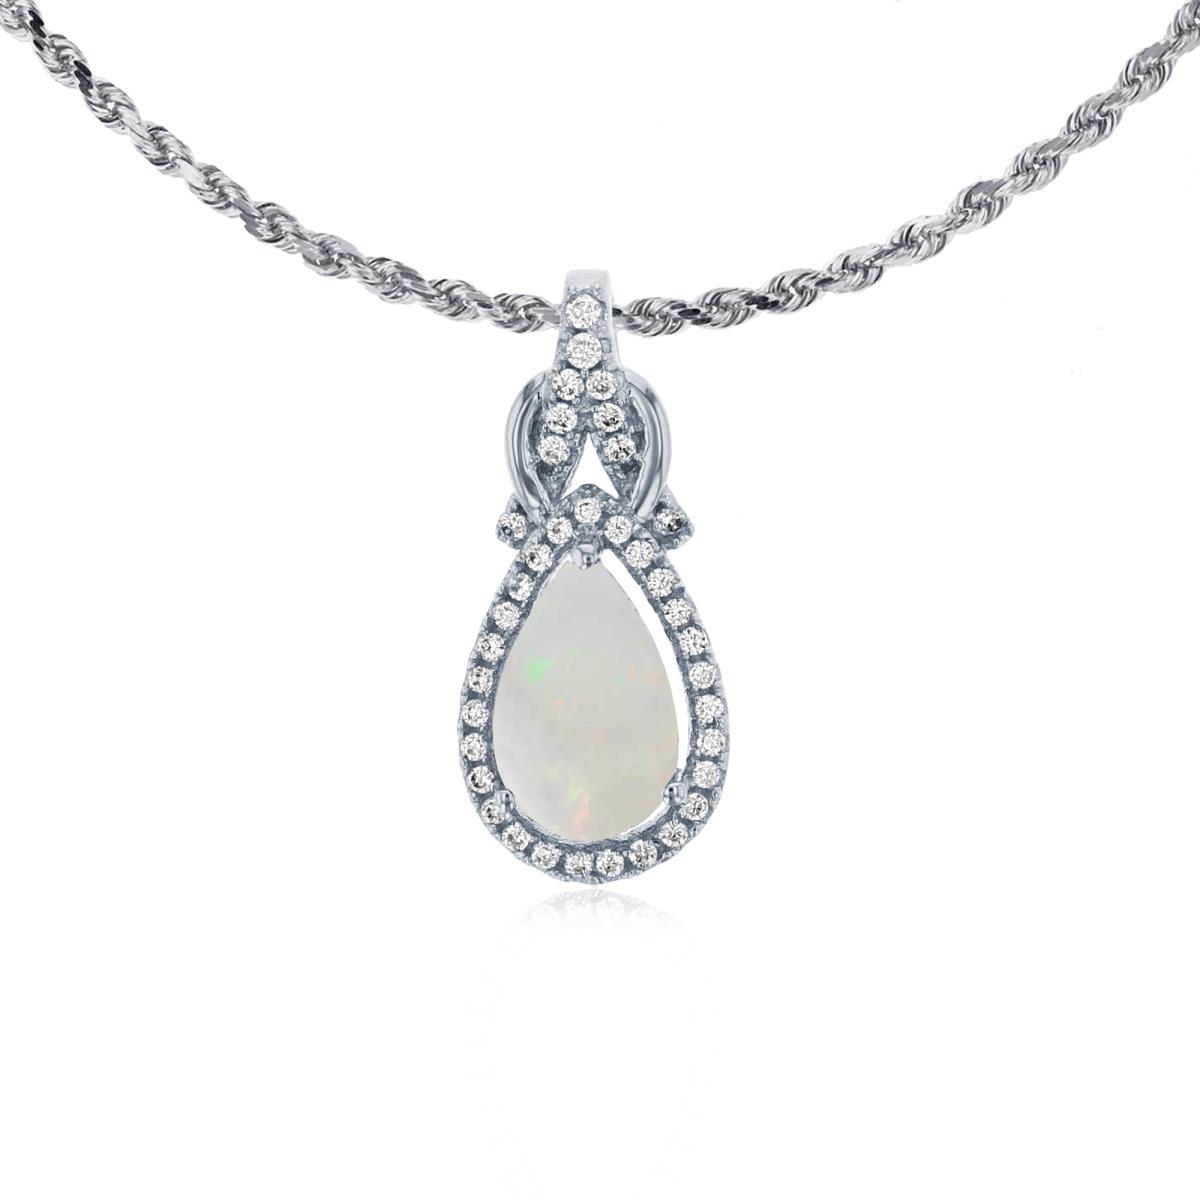 10K White Gold 8x5mm Pear Cut Opal & 0.11 CTTW Rnd Diamond Knot 18" Rope Chain Necklace